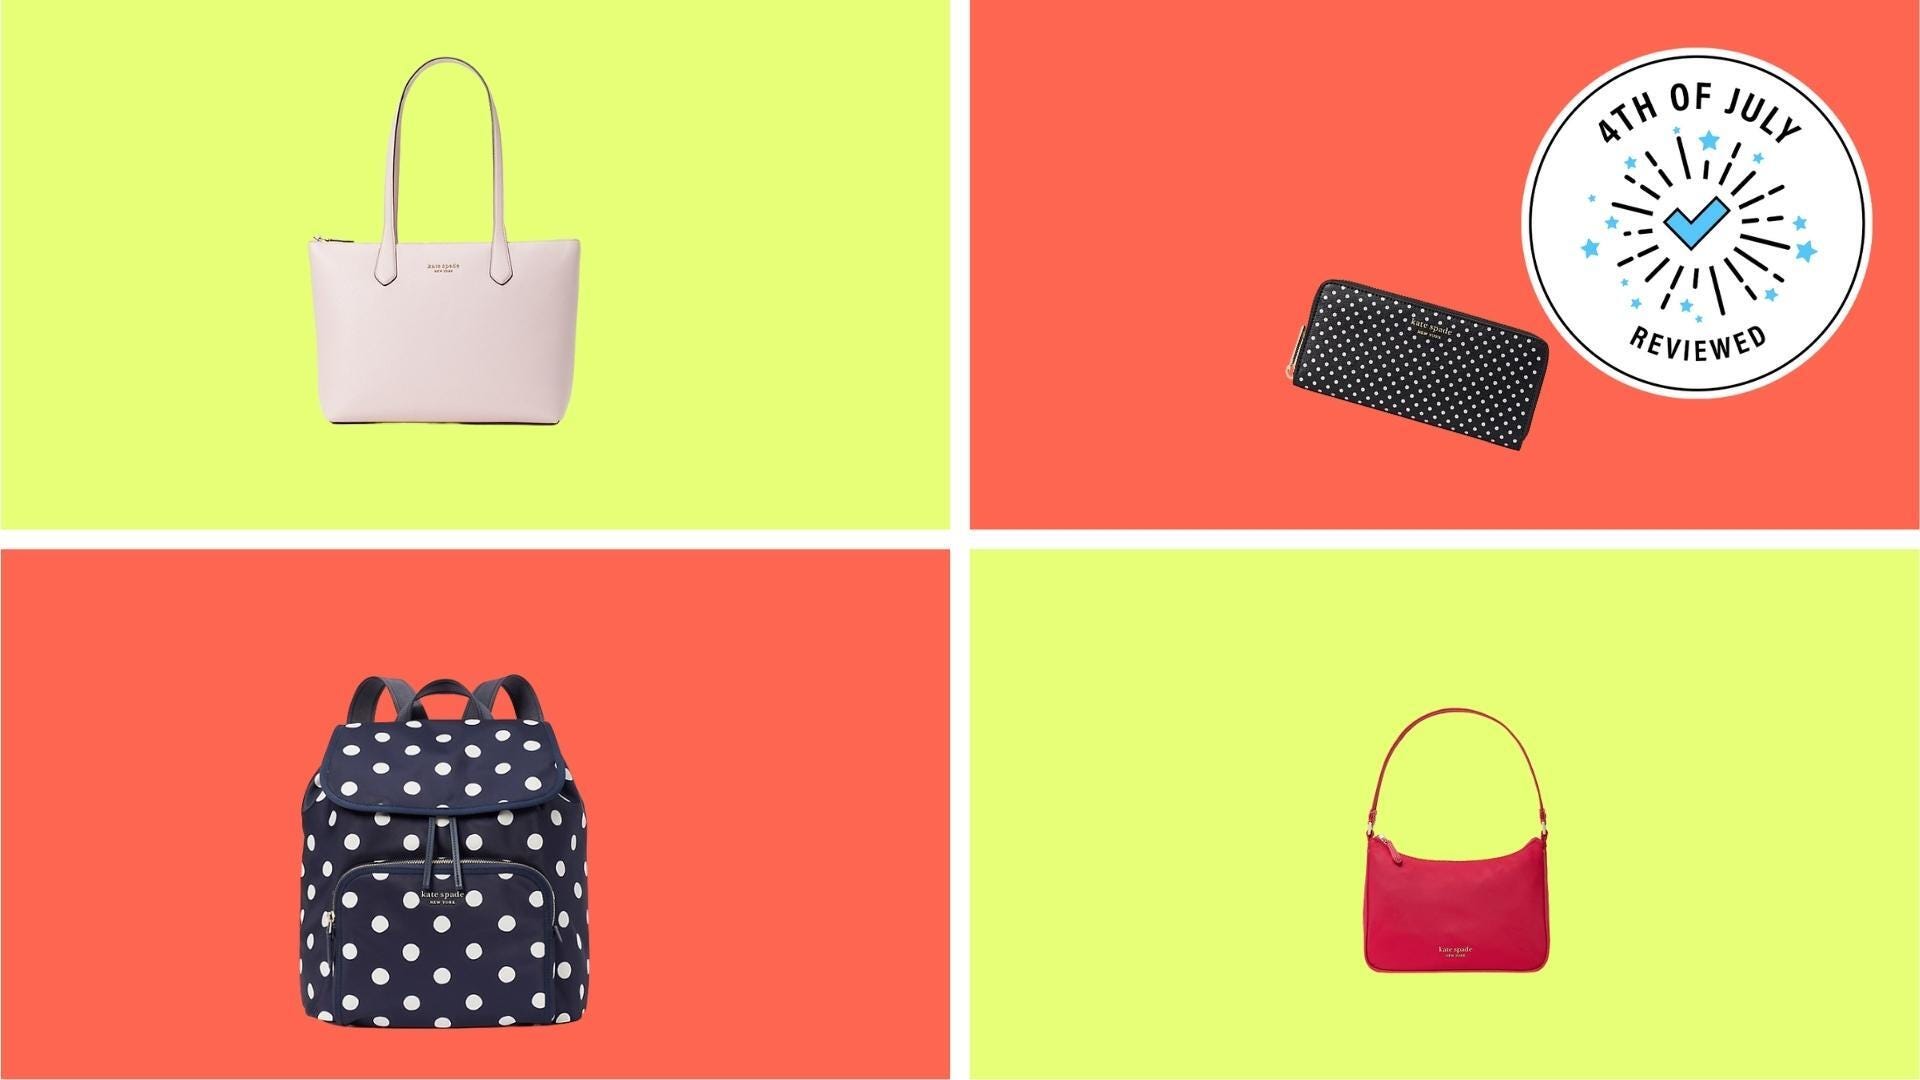 4th of July sale: Save an extra 40% on Kate Spade purses